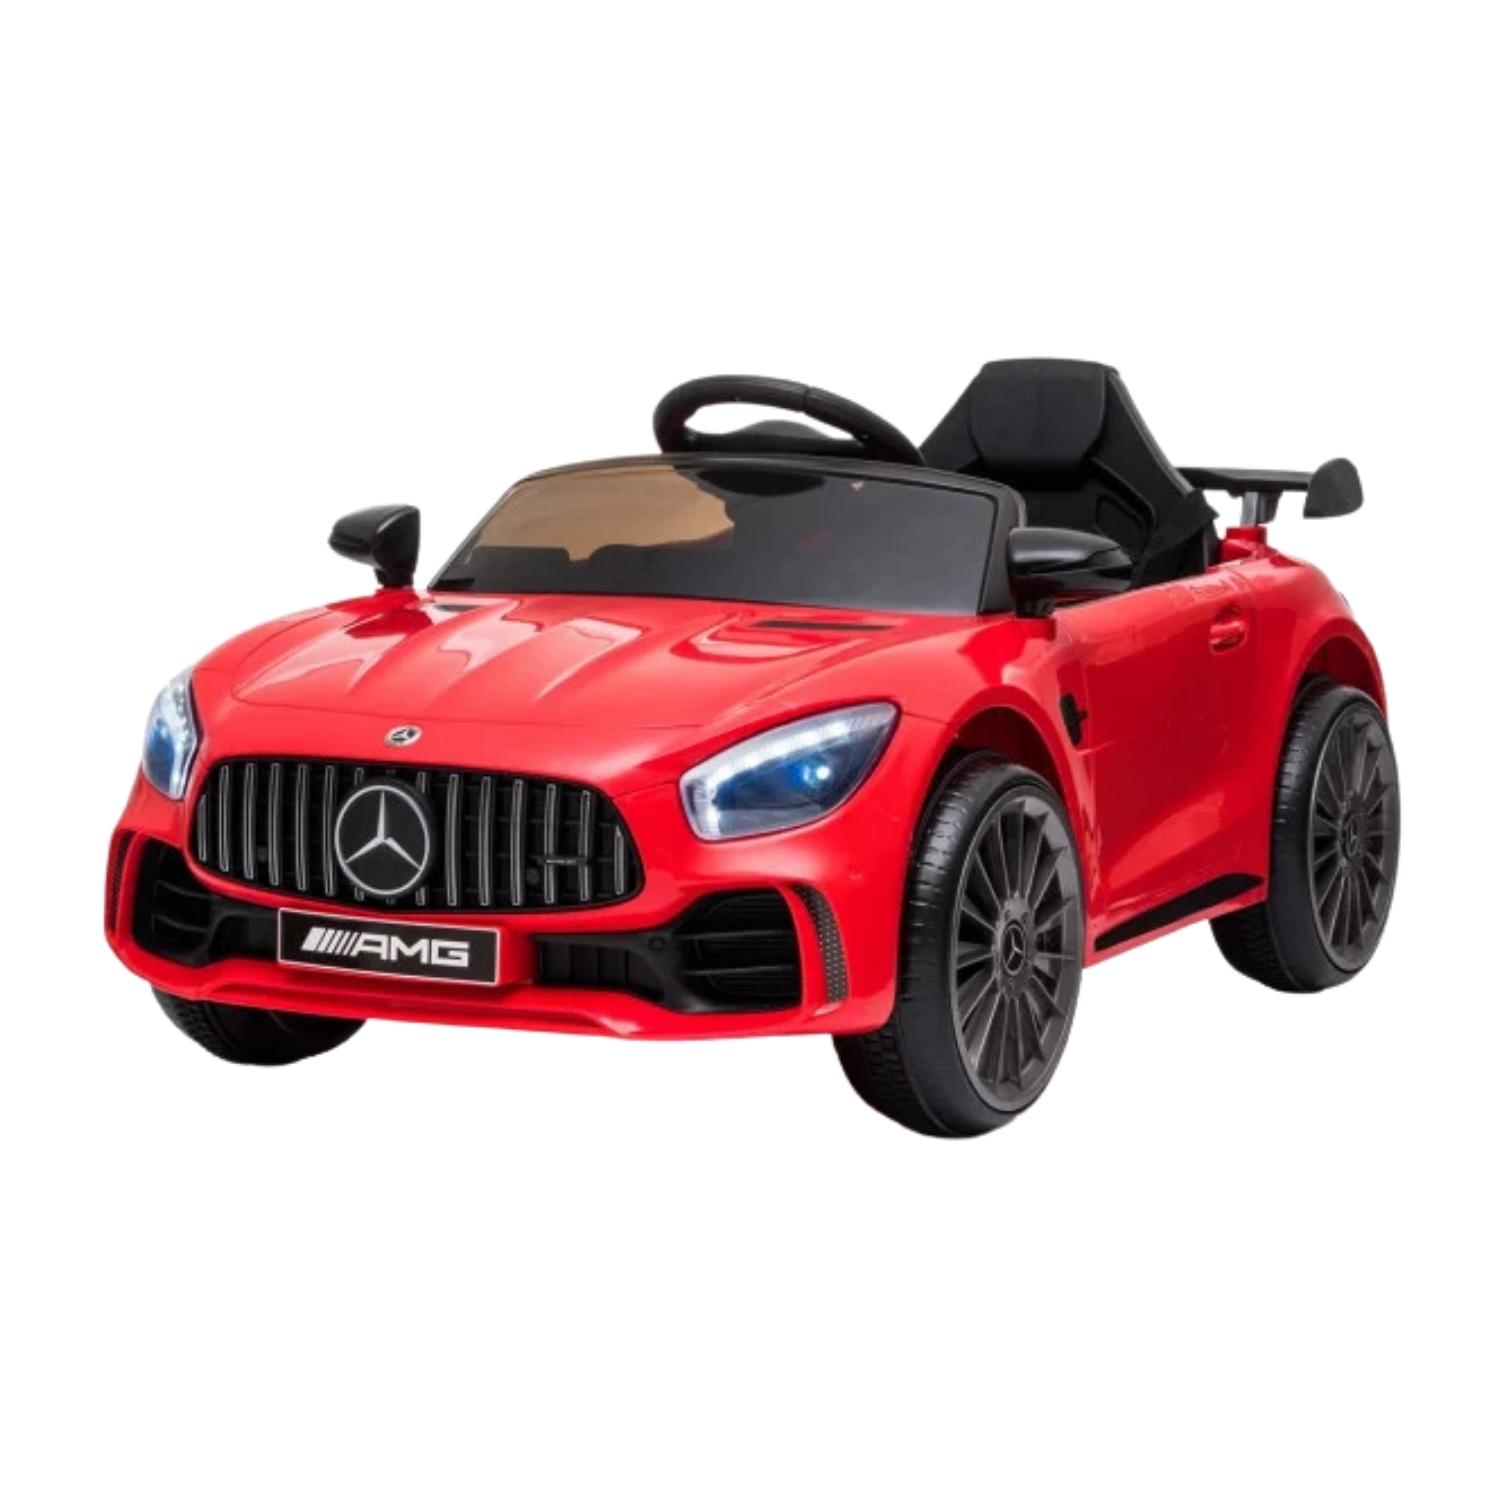 Mercedes Benz Licensed Kids Electric Ride On Car Remote Control Red 2